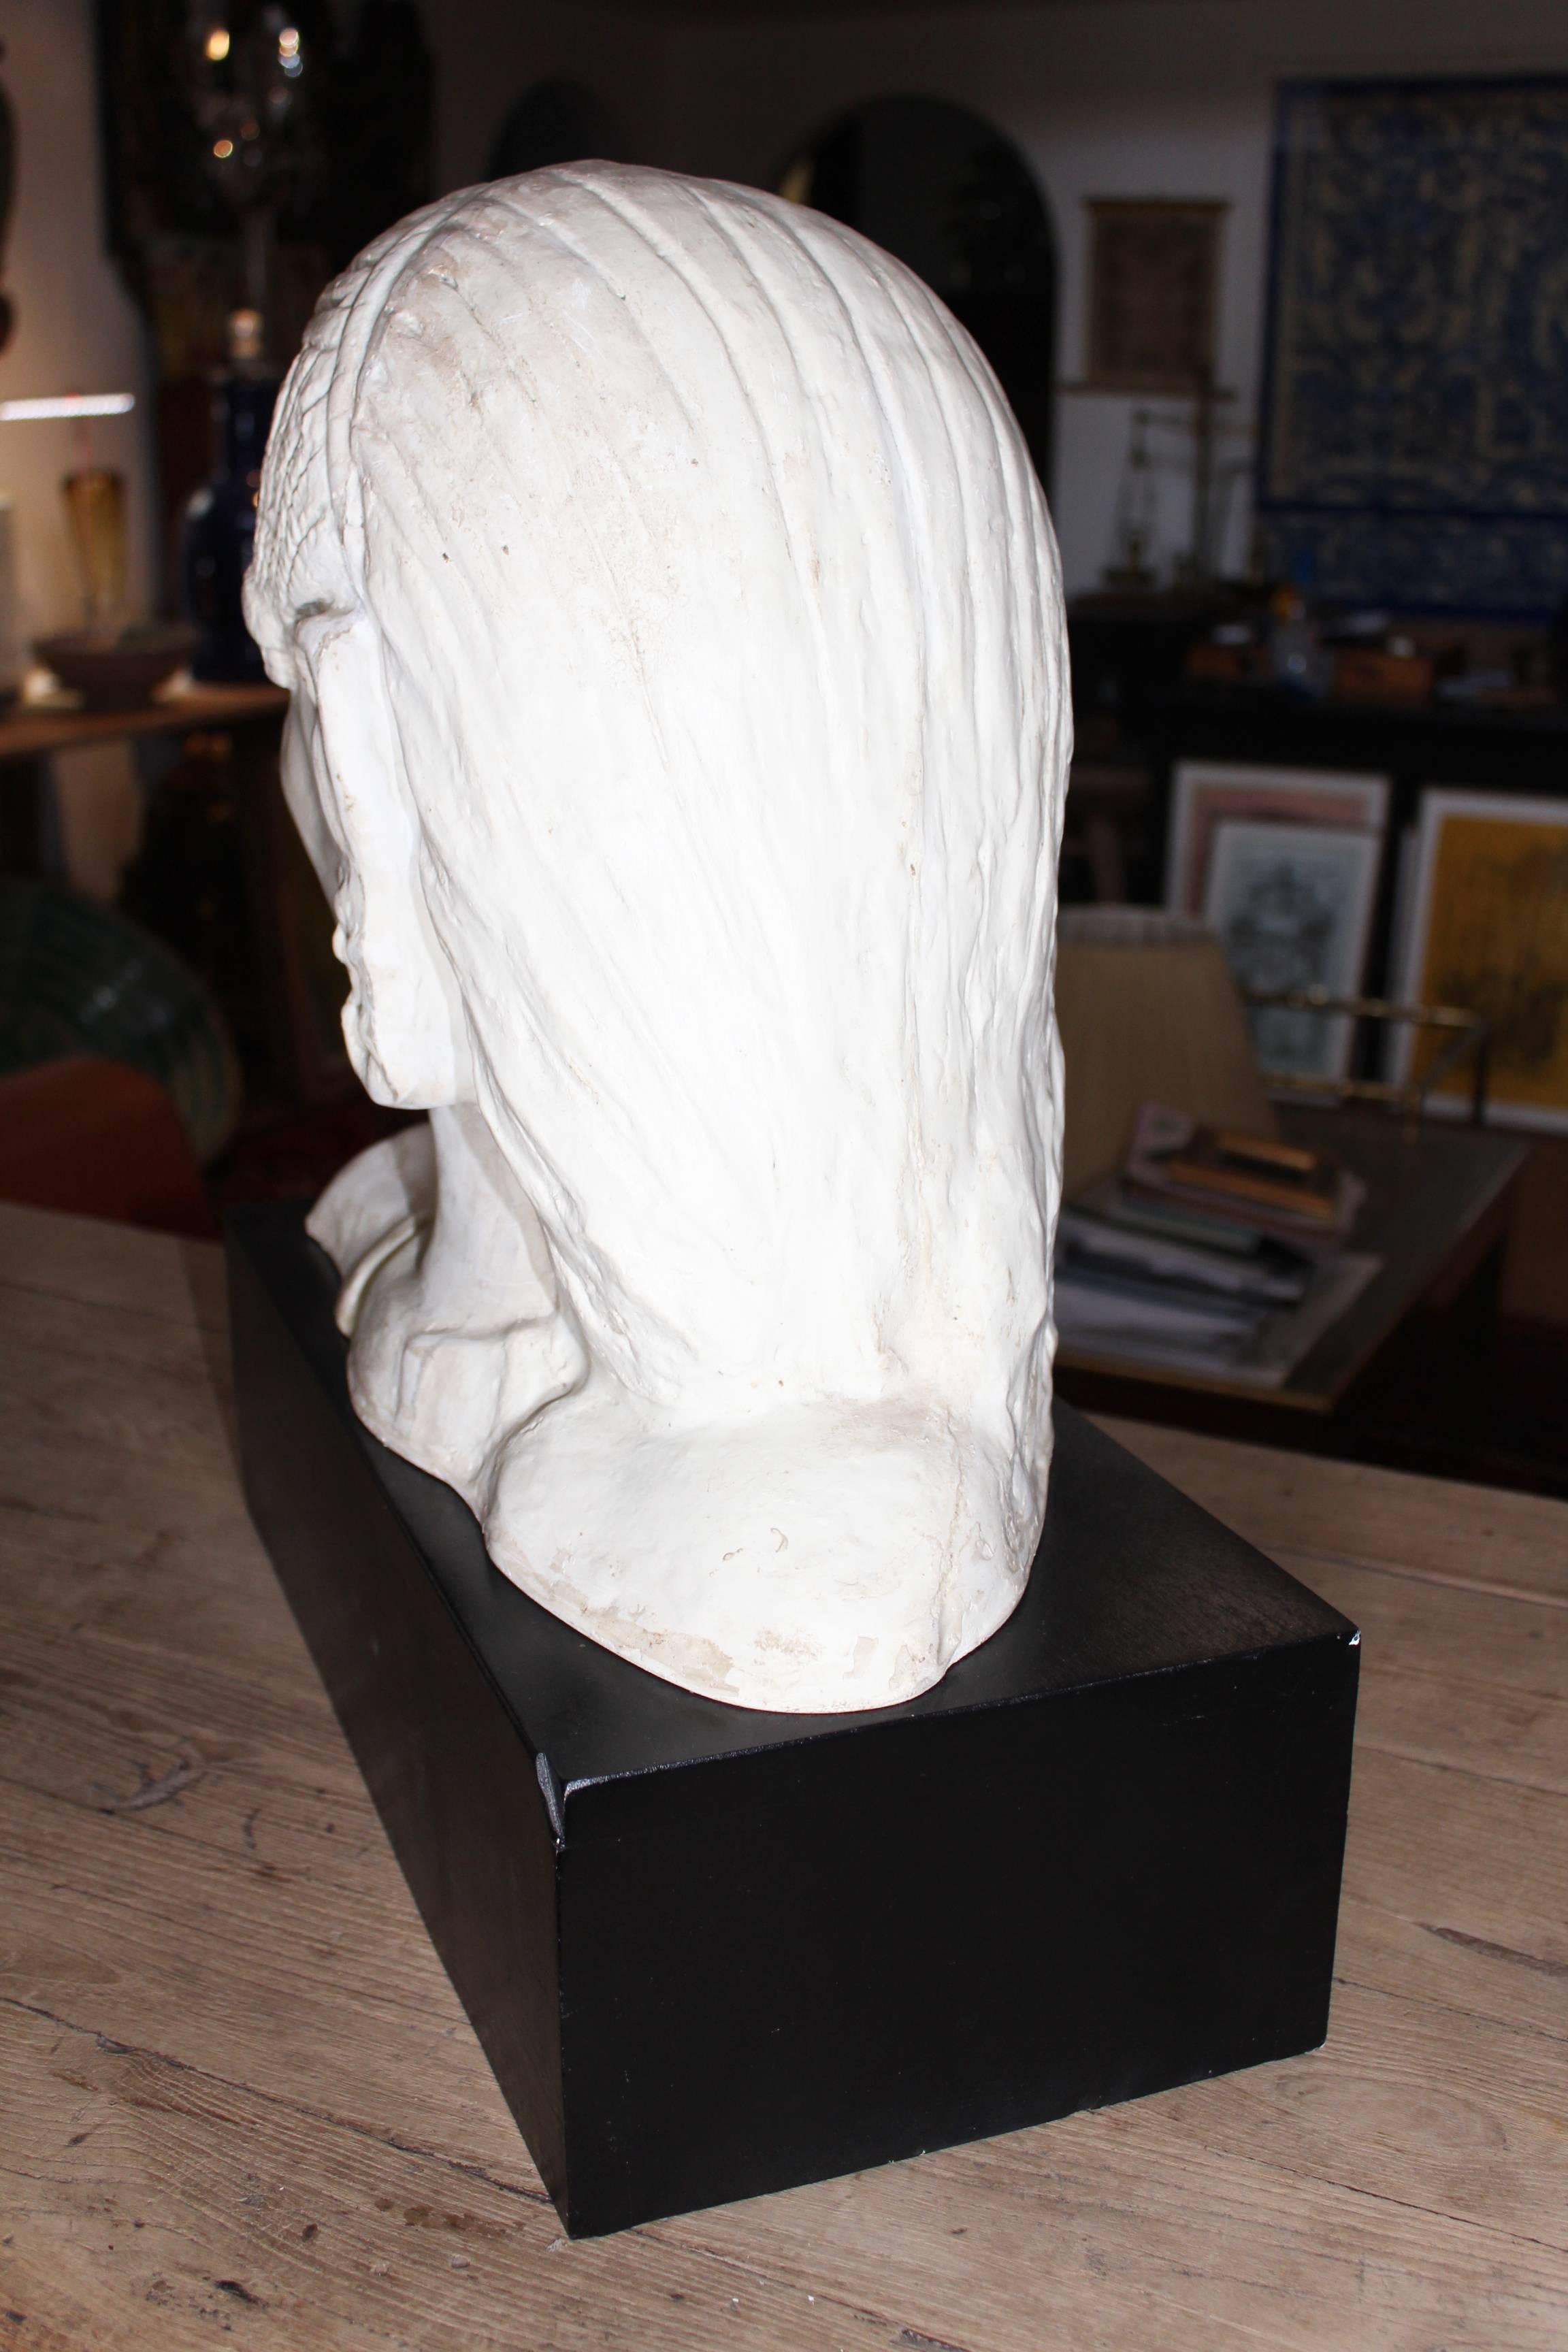 Pair of Resin African Busts with Plaster Finish on a Black Wooden Pedestal 1